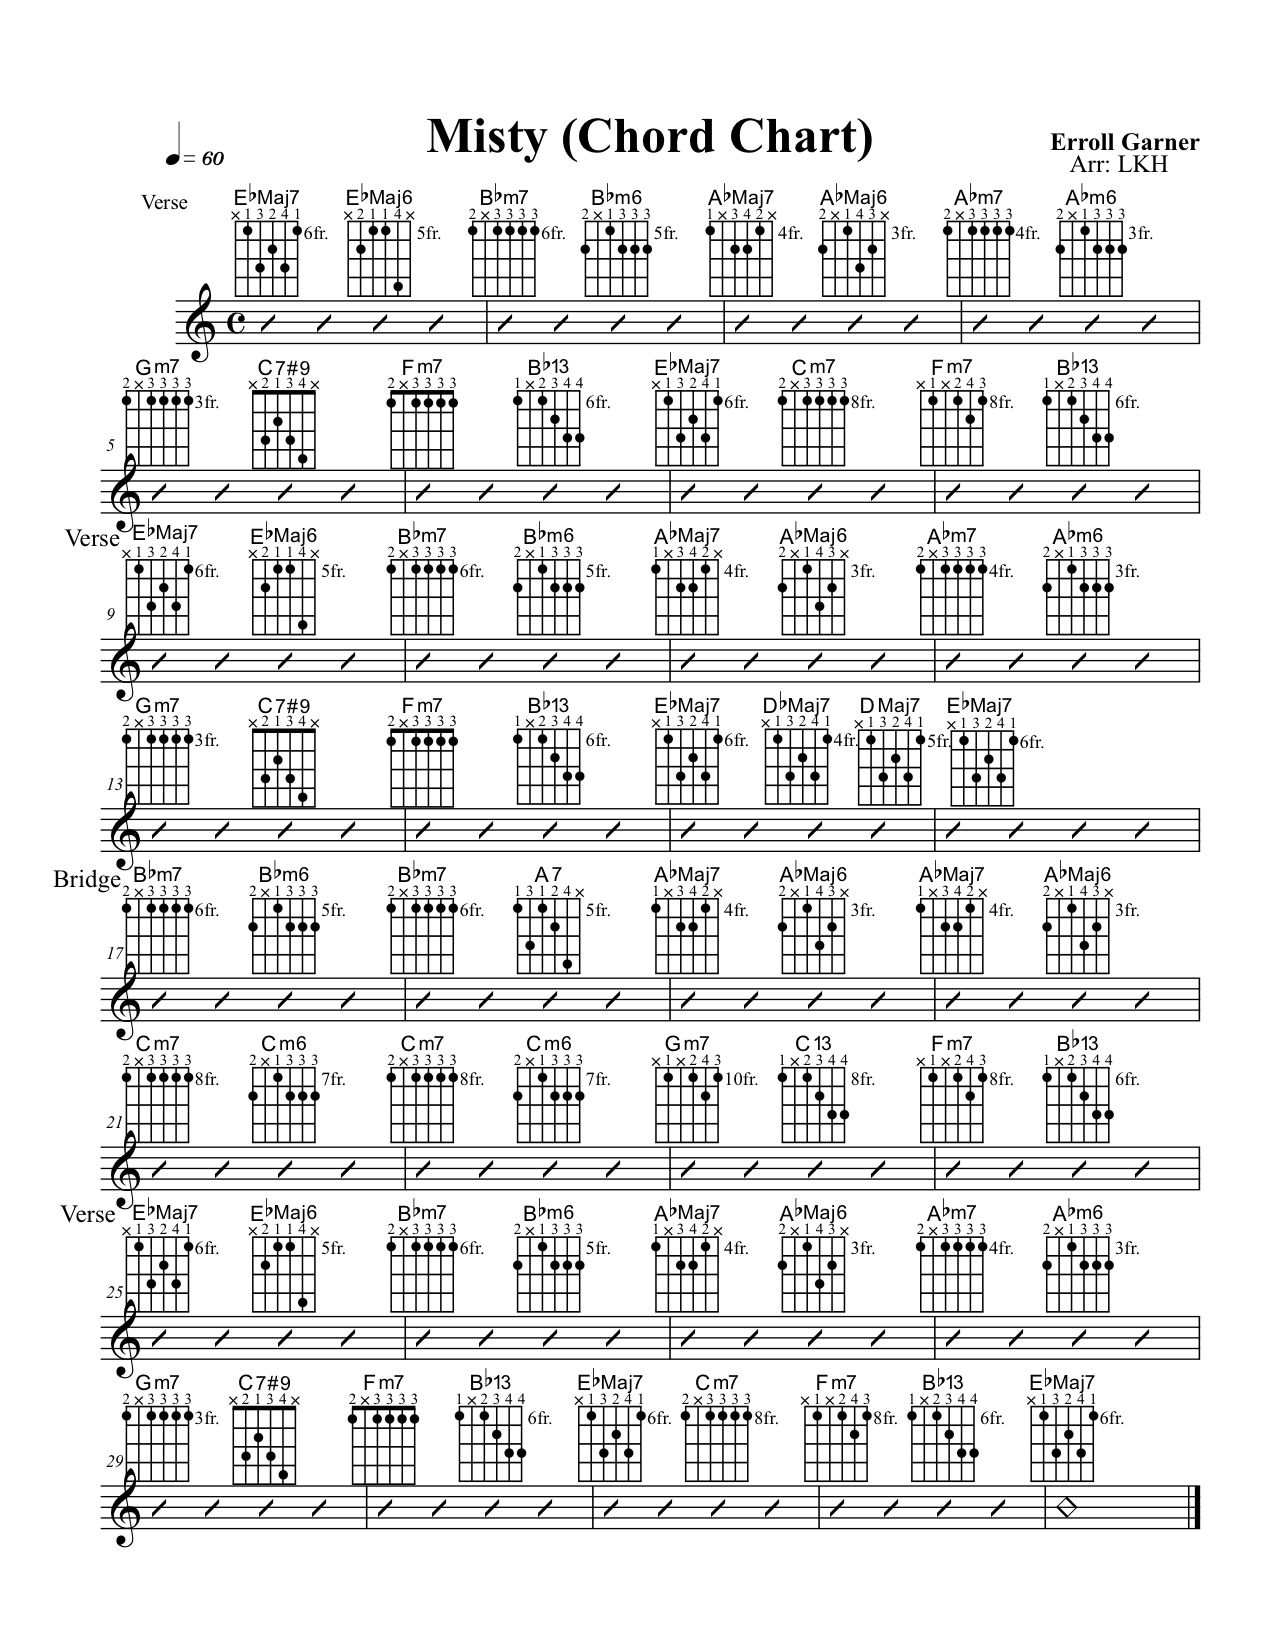 Piano Jazz Chords Chart Pdf equitynew